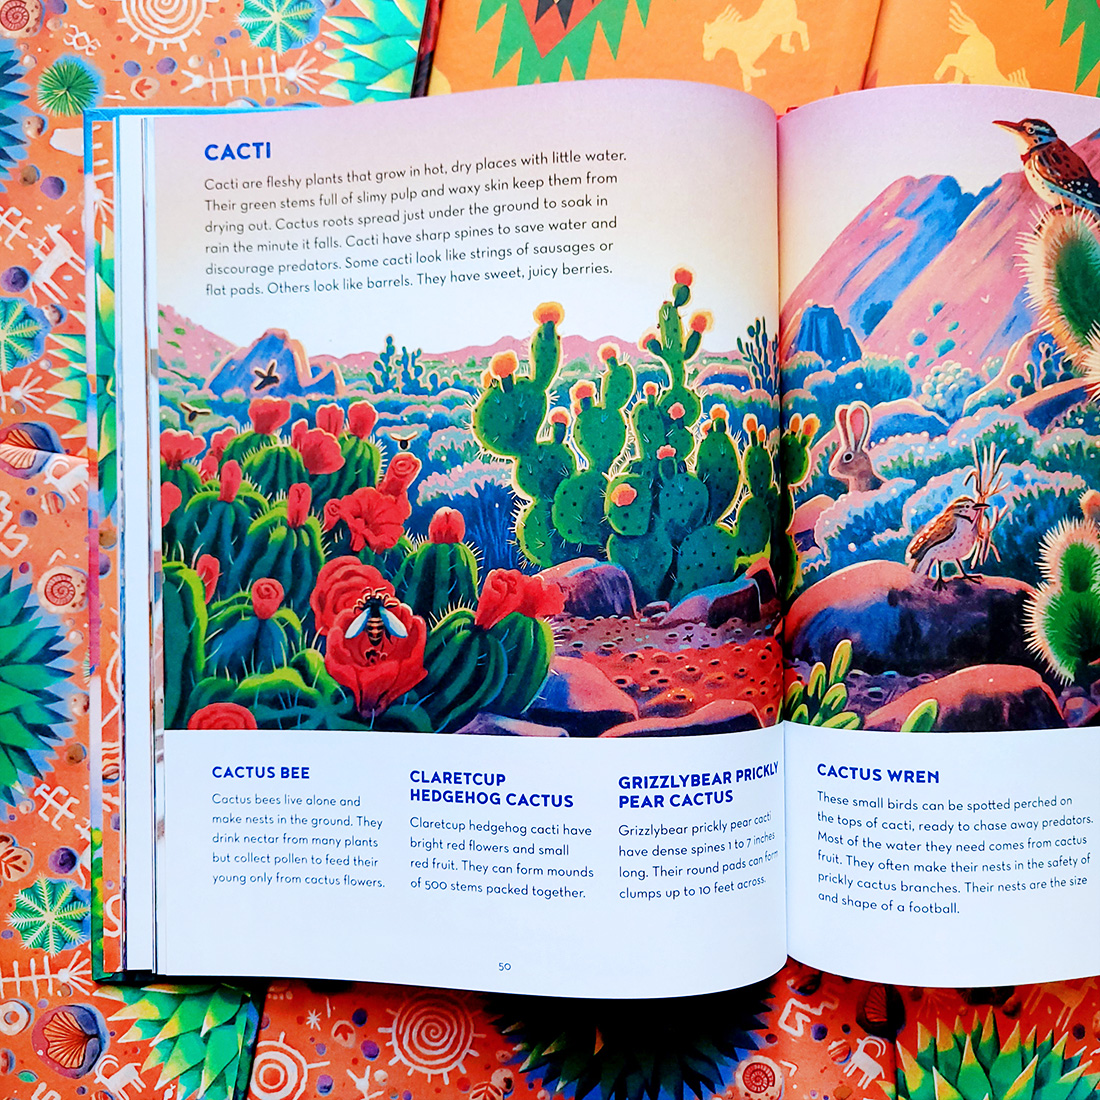 🦅 It's #NationalParkWeek! 📗 Earth’s Incredible Places: #GrandCanyon by Susan Lamb, Sean Lewis flyingeyebooks.com/book/earths-in… A captivating, illustrated introduction to one of the seven natural wonders of the world, the Grand Canyon National Park.